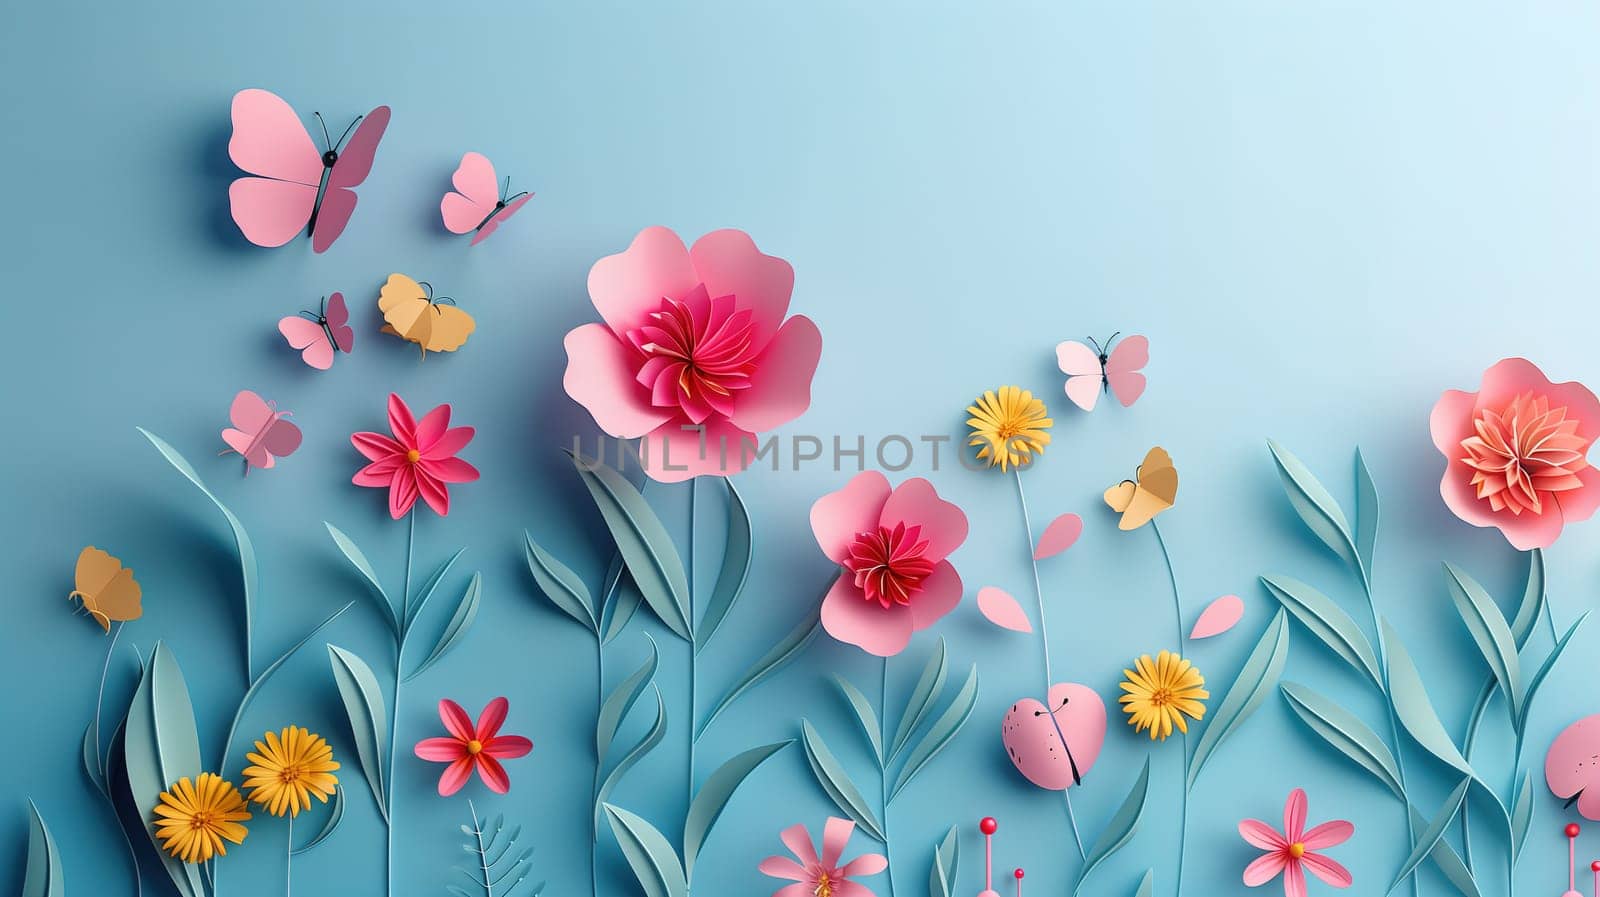 Paper Flowers and Butterflies on a Blue Background by TRMK